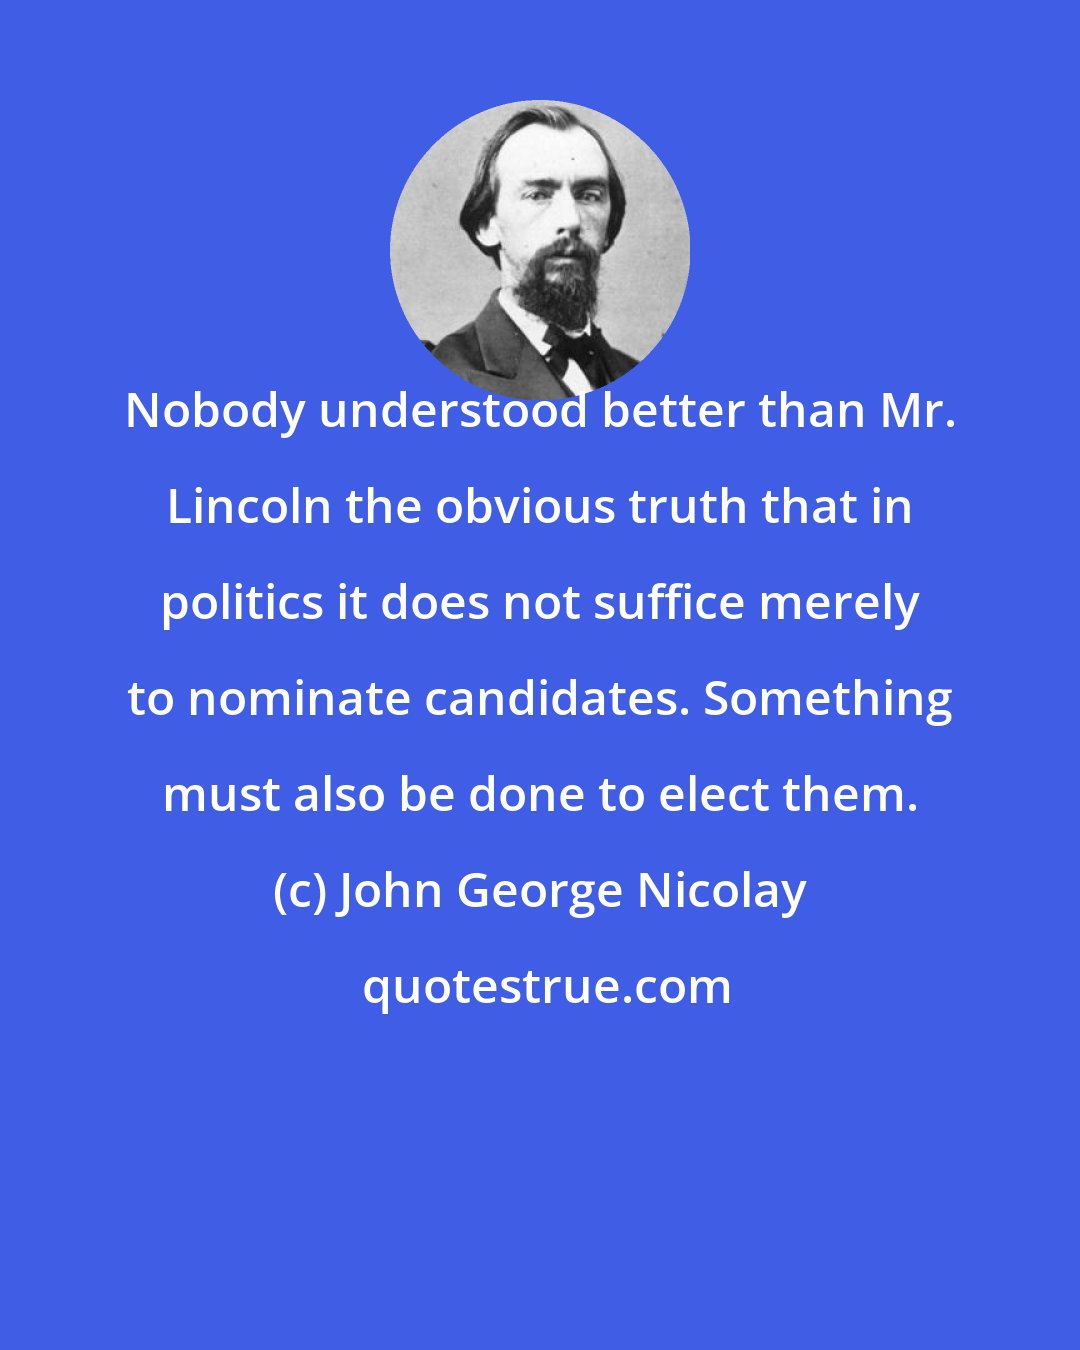 John George Nicolay: Nobody understood better than Mr. Lincoln the obvious truth that in politics it does not suffice merely to nominate candidates. Something must also be done to elect them.